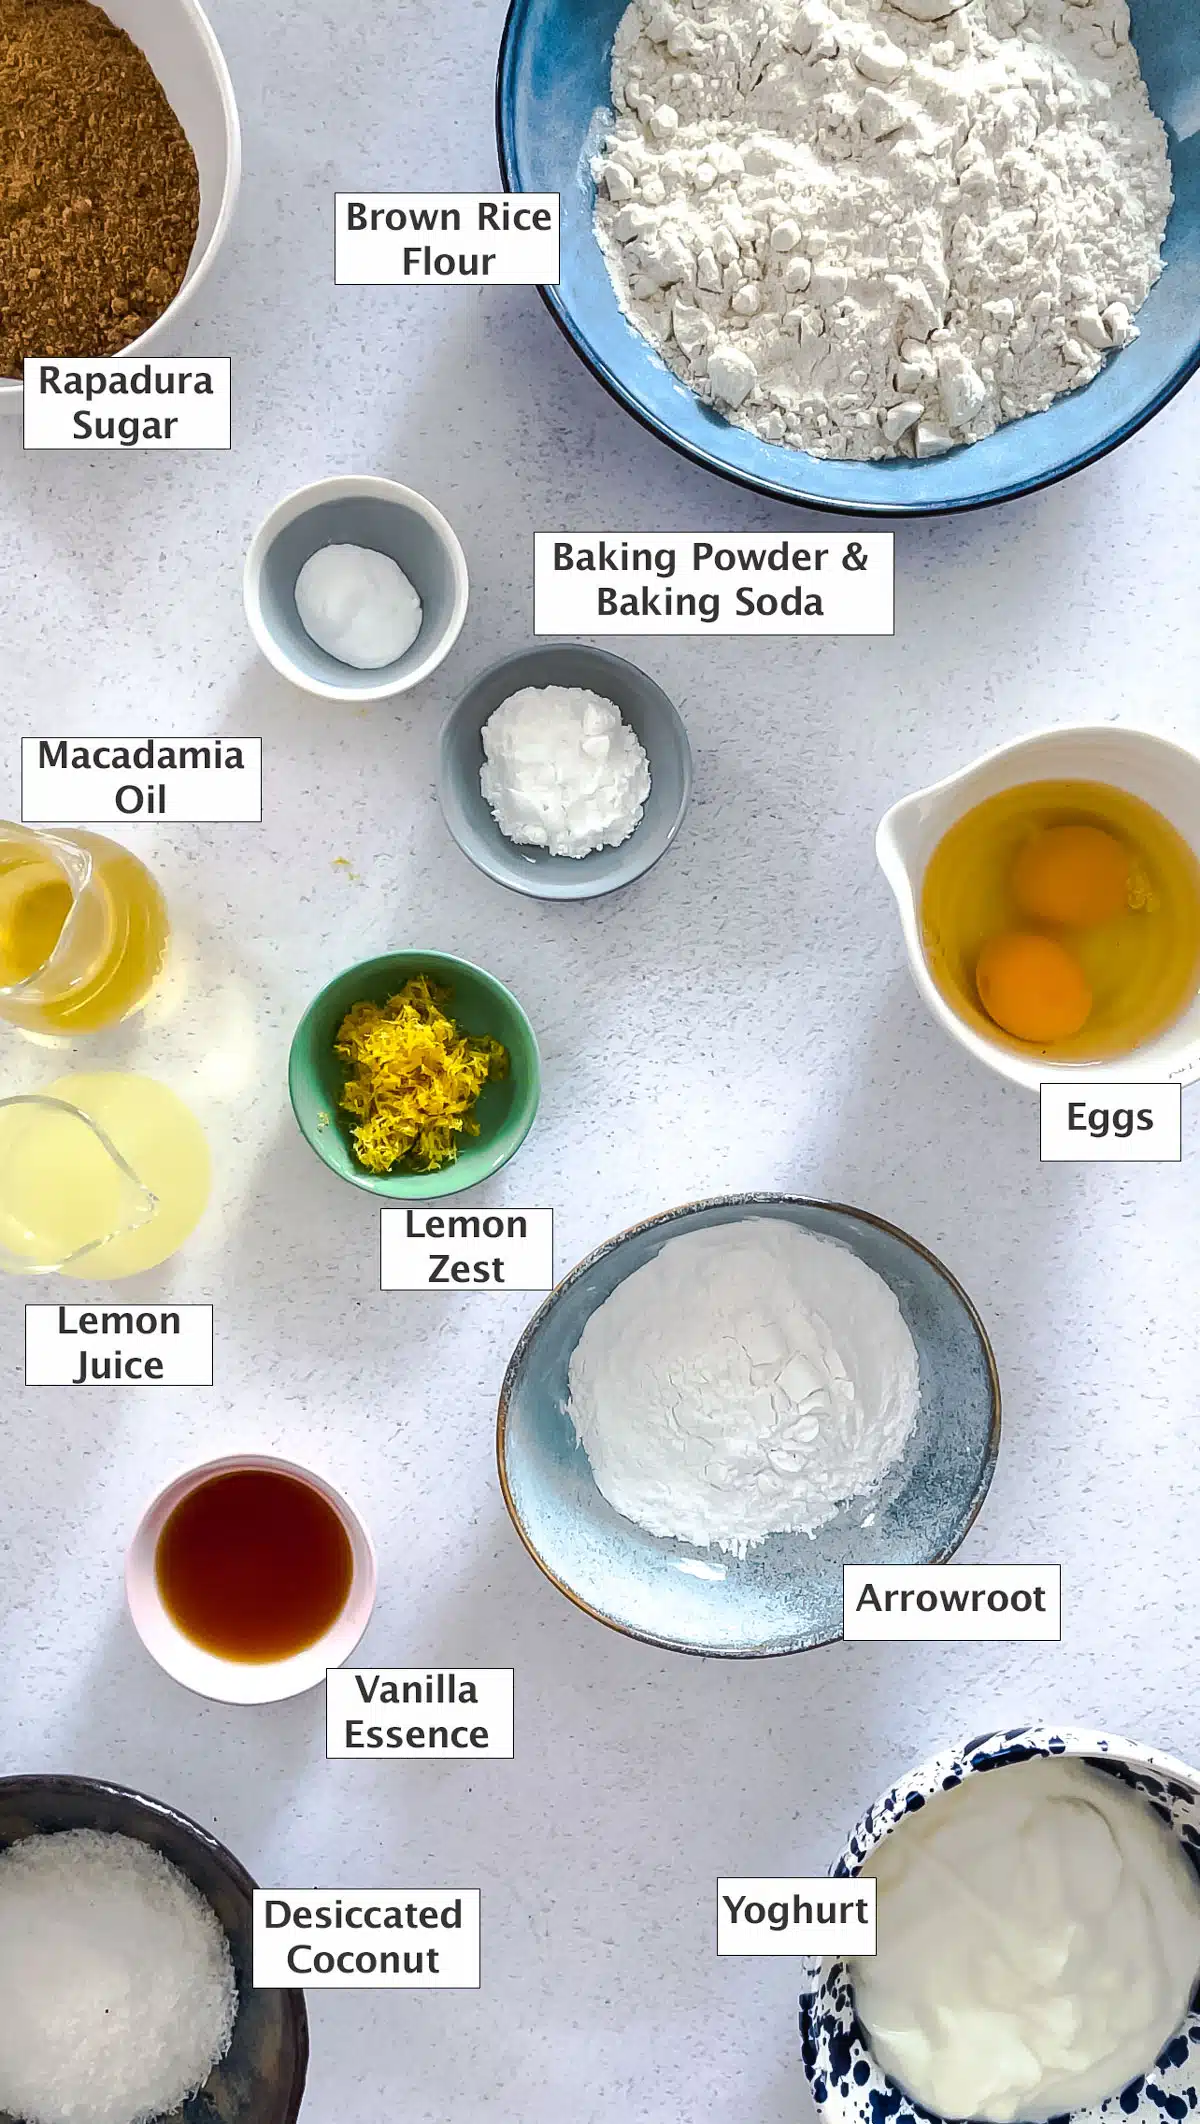 All the ingredients needed to make lemon curd muffins have been laid out across a table in various small bowls.